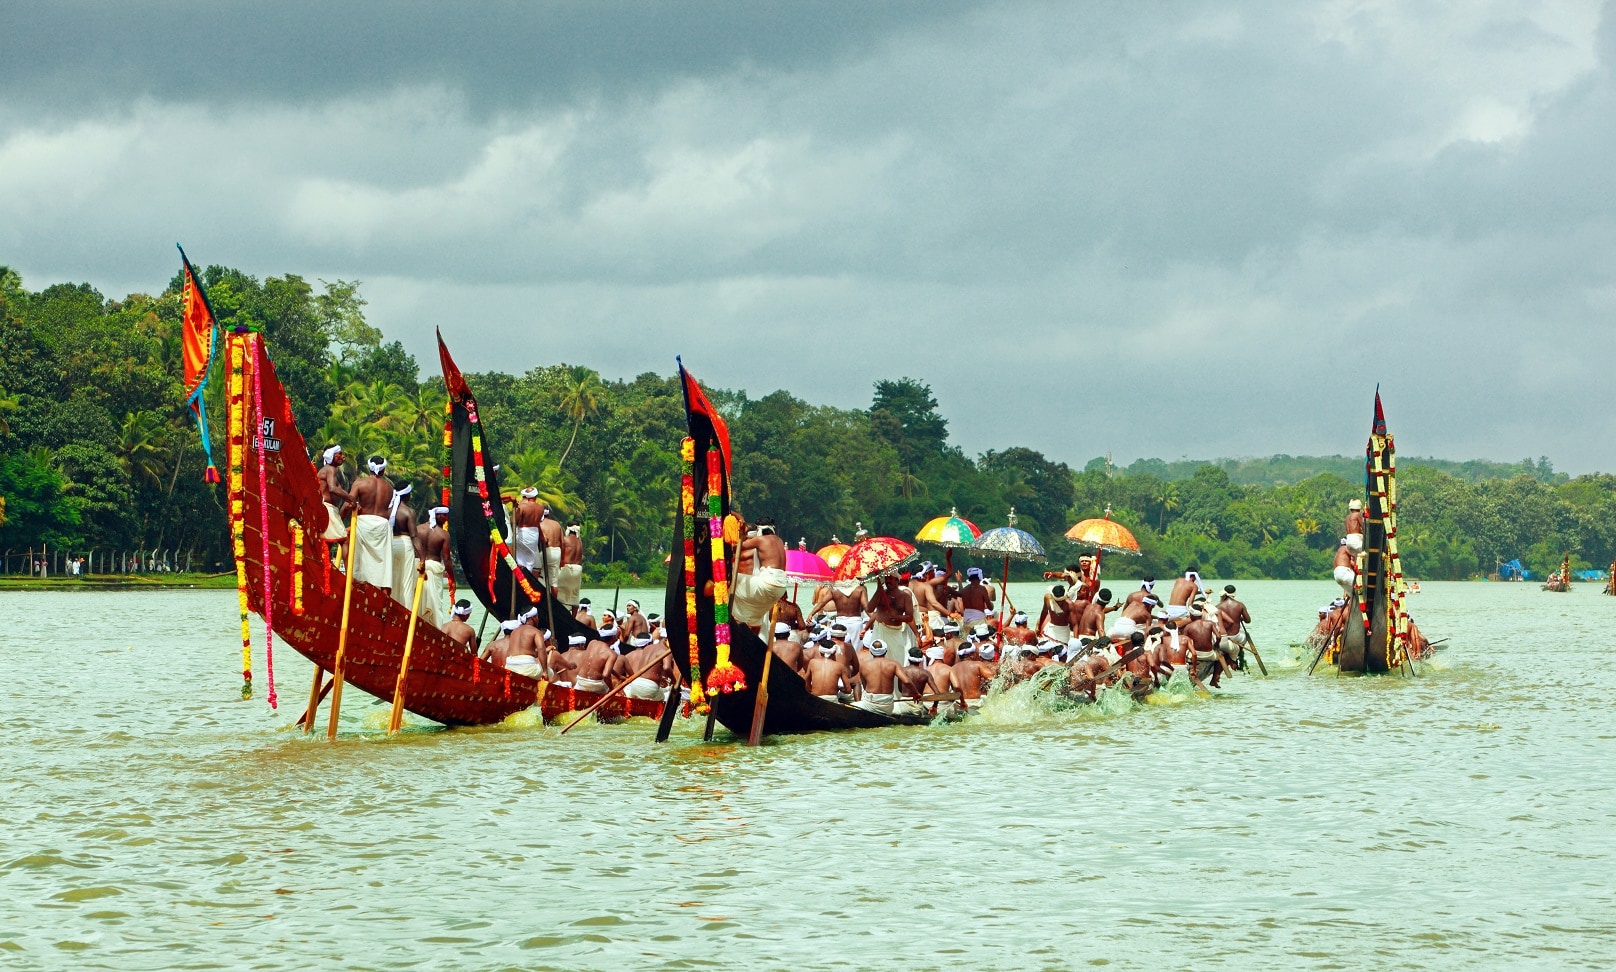 The Snake Boat Races of Kerala - India's very own 'Olympics on Water'!